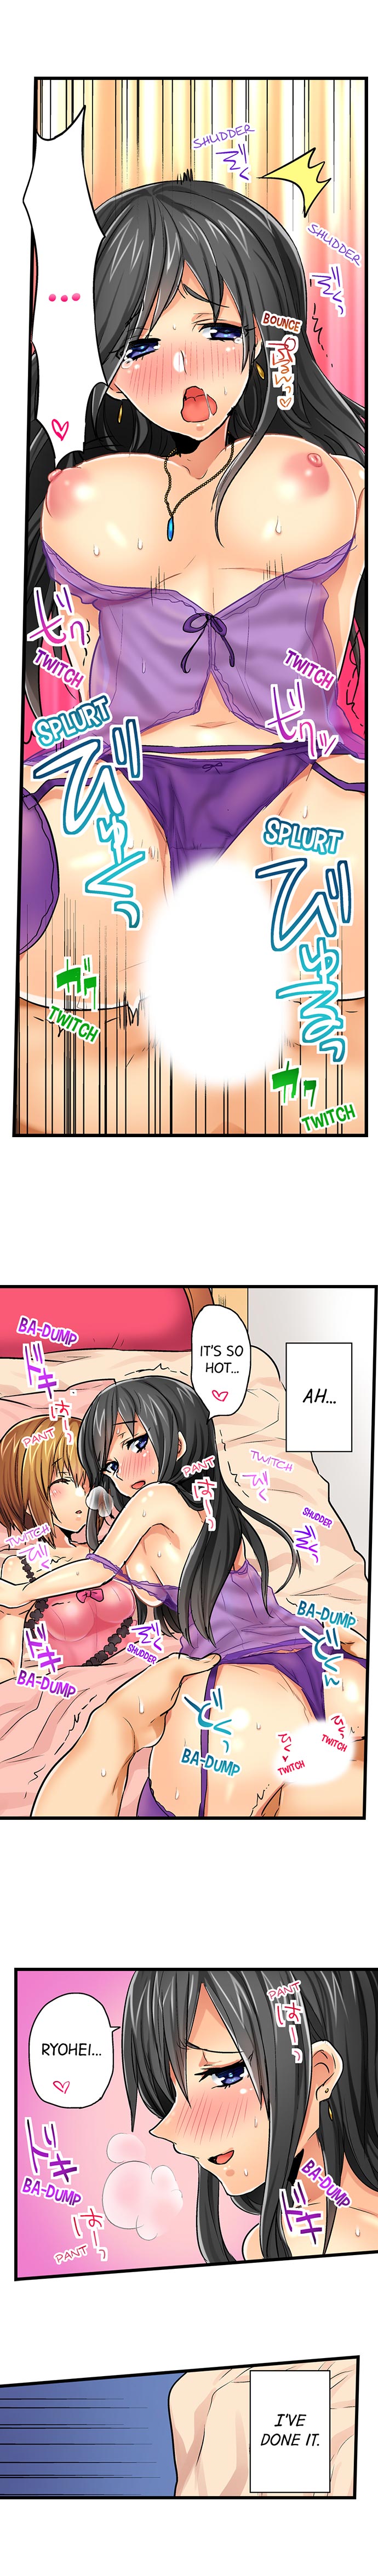 Chance to Fuuuck! ~Joining a Girls Night Out - Chapter 4 Page 7